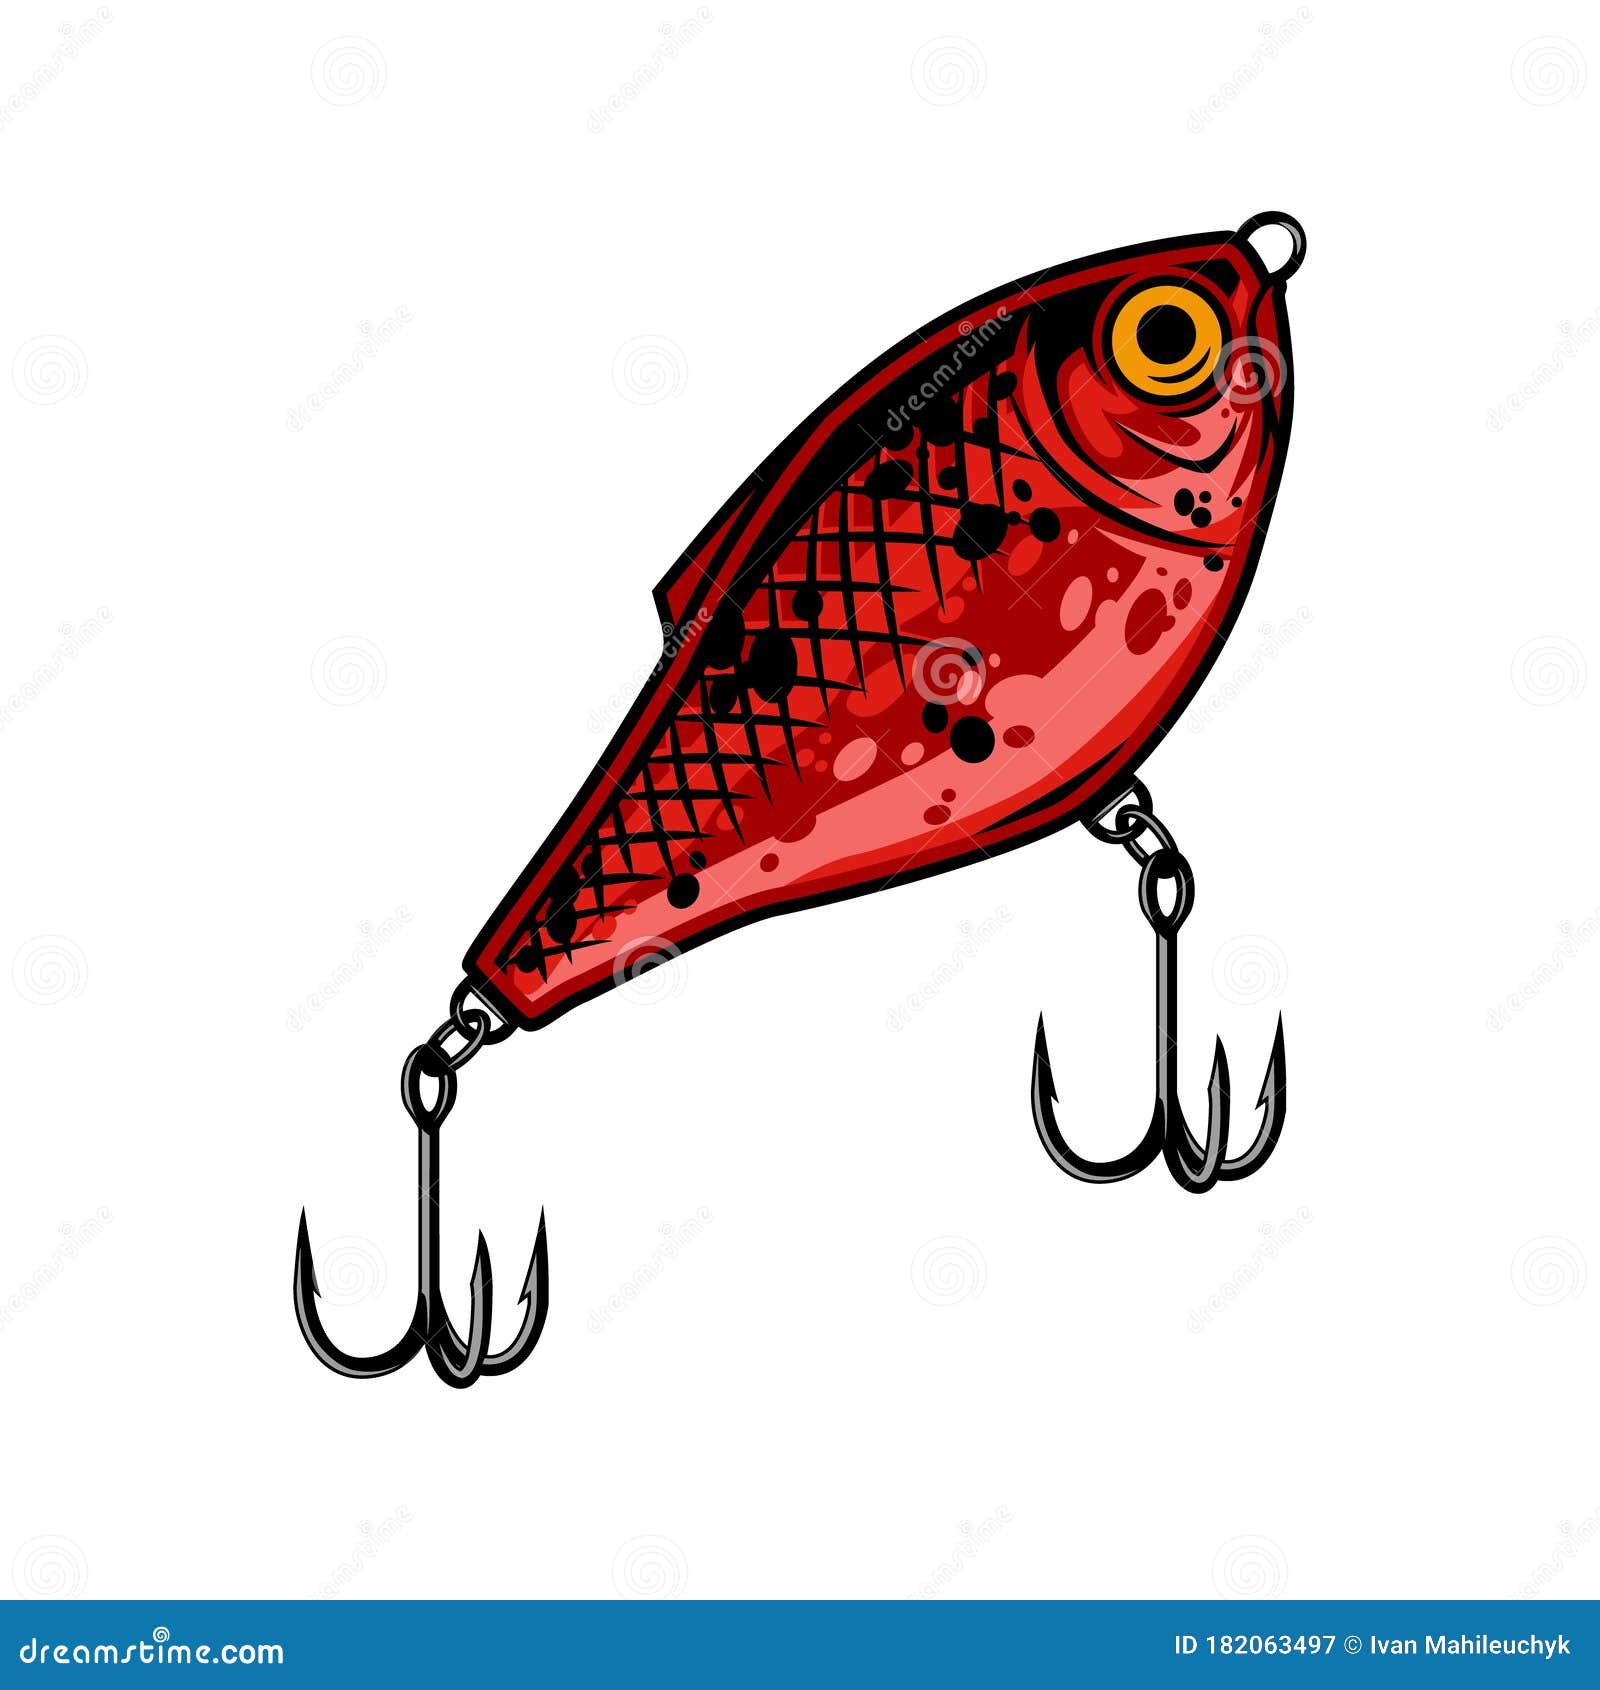 Red Fishing Lure Vintage Template Stock Vector - Illustration of